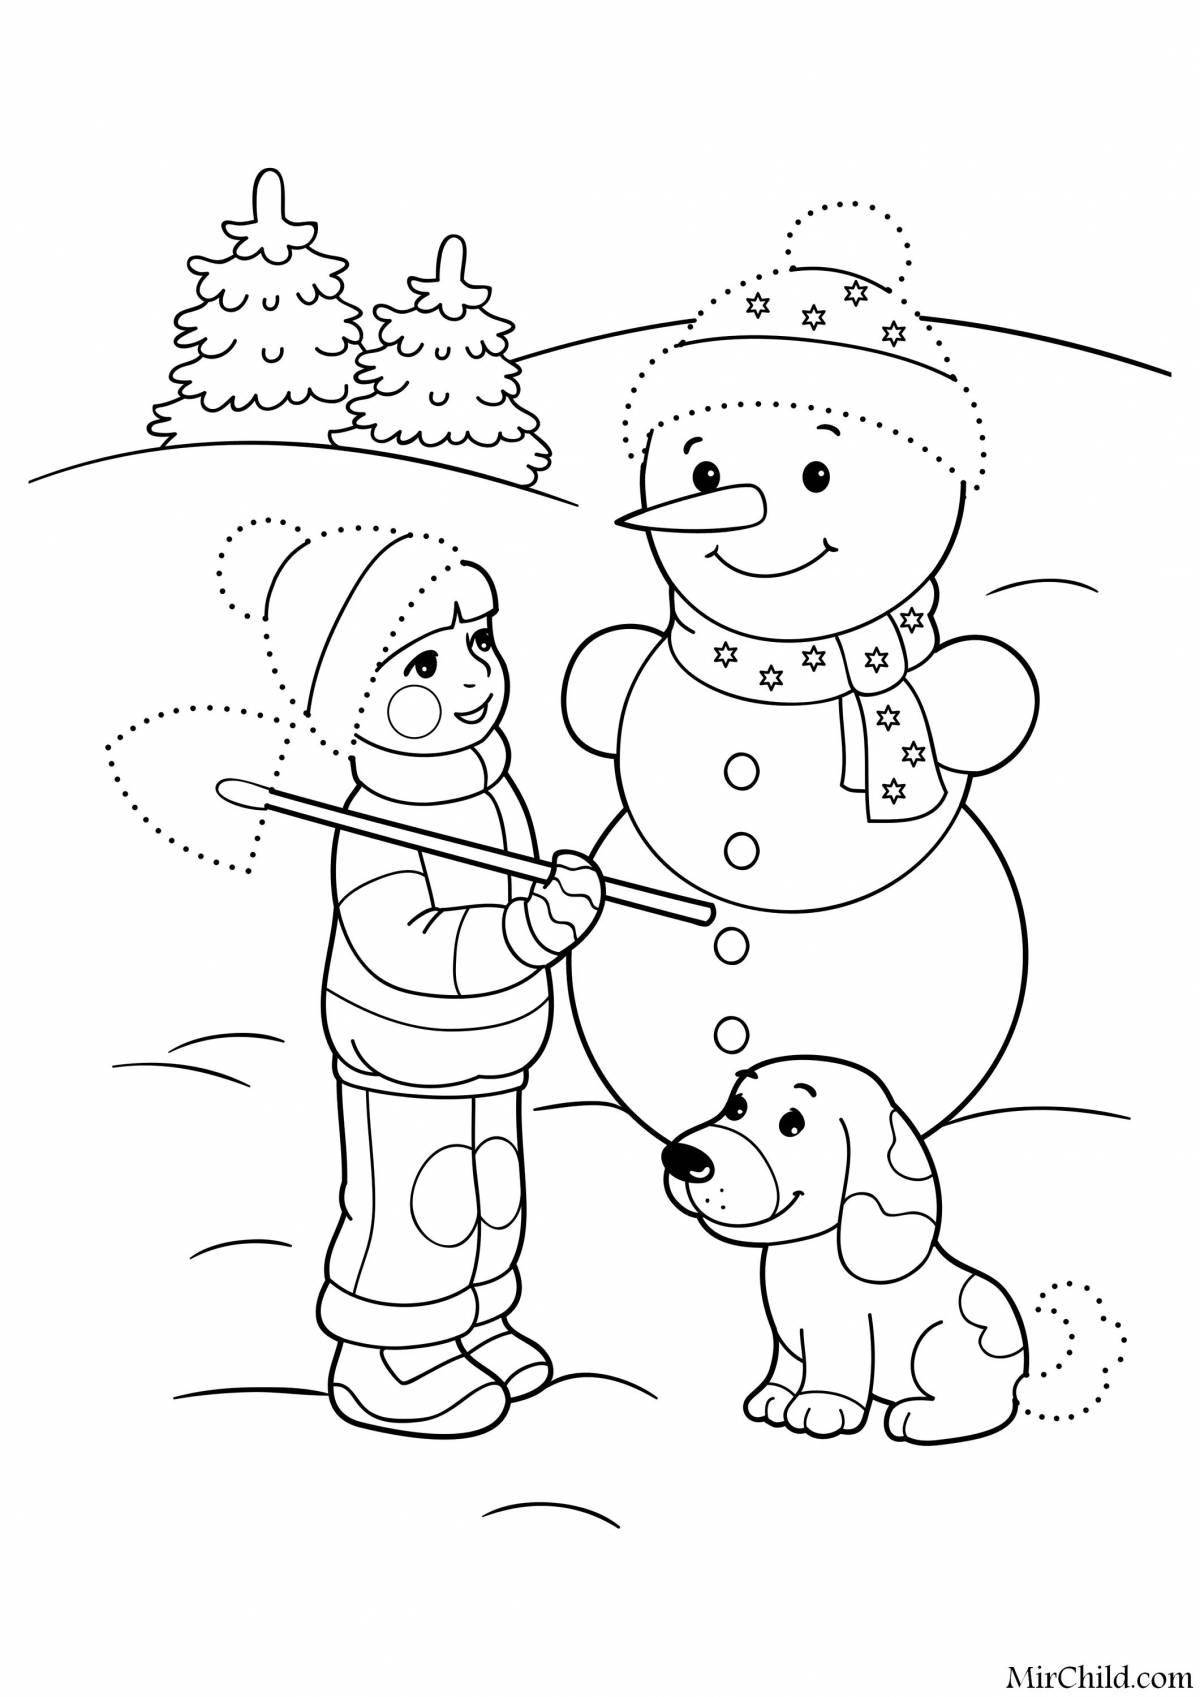 Glitter winter coloring book for kids 6-7 years old